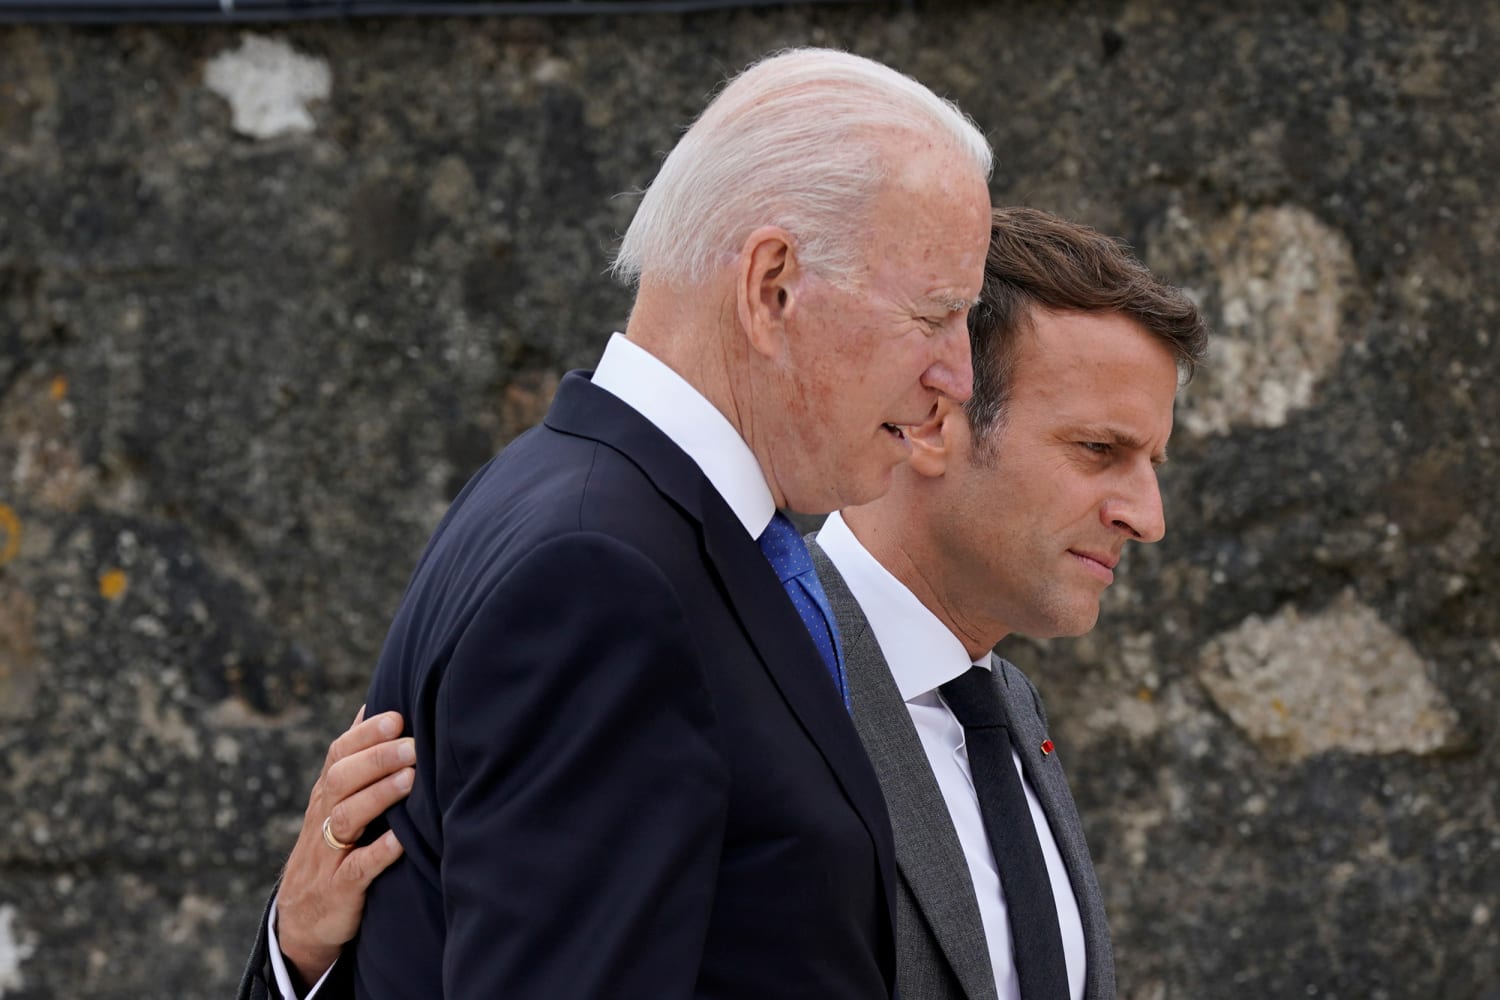 Biden to meet with France’s Macron as U.S. looks to mend fences after submarine spat